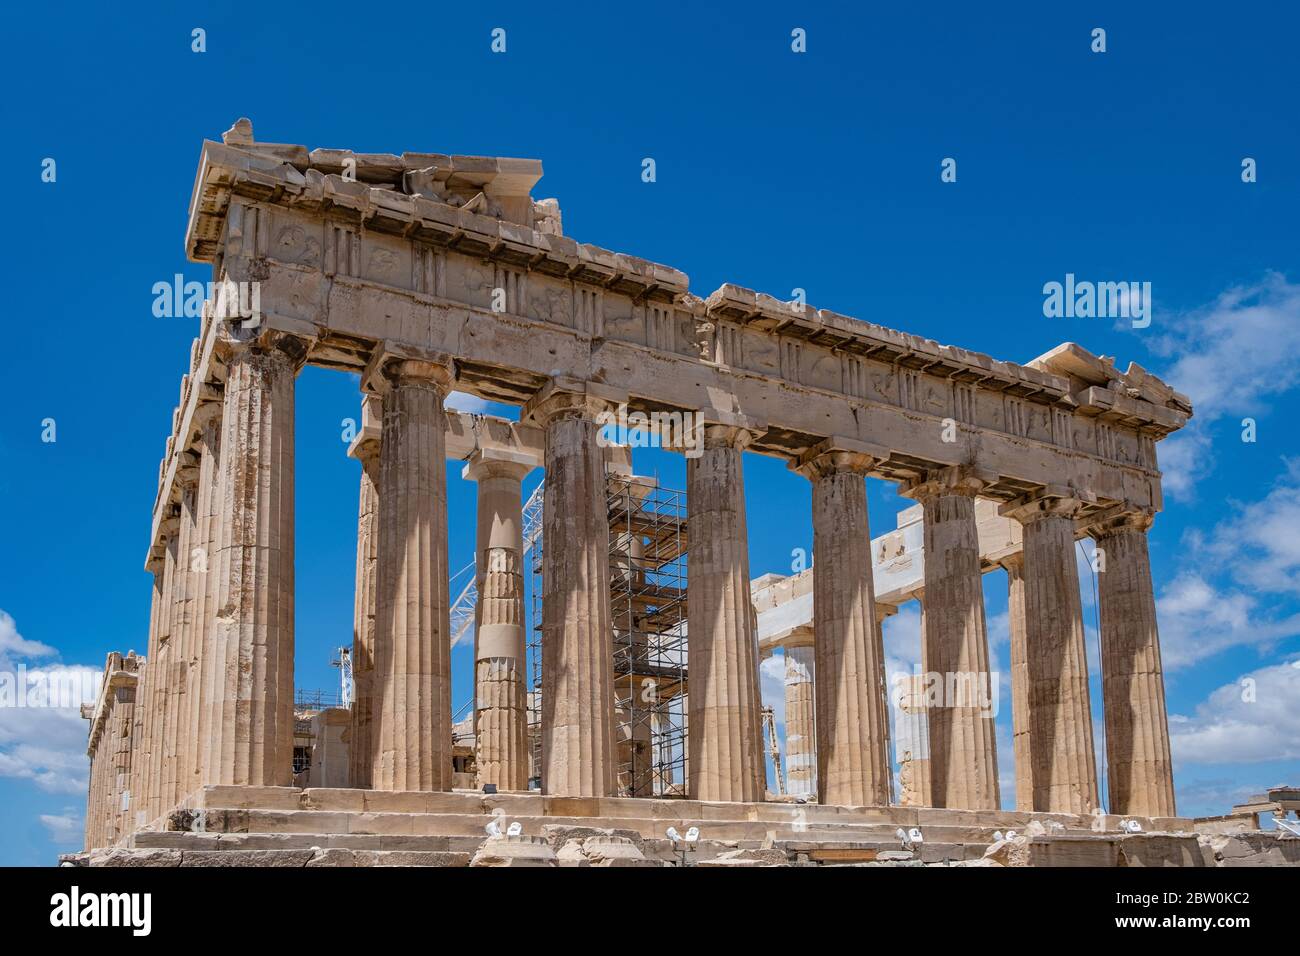 Athens Acropolis, Greece. Parthenon temple facade, ancient temple ruins, equipment for restoration works, blue sky, low angle view Stock Photo